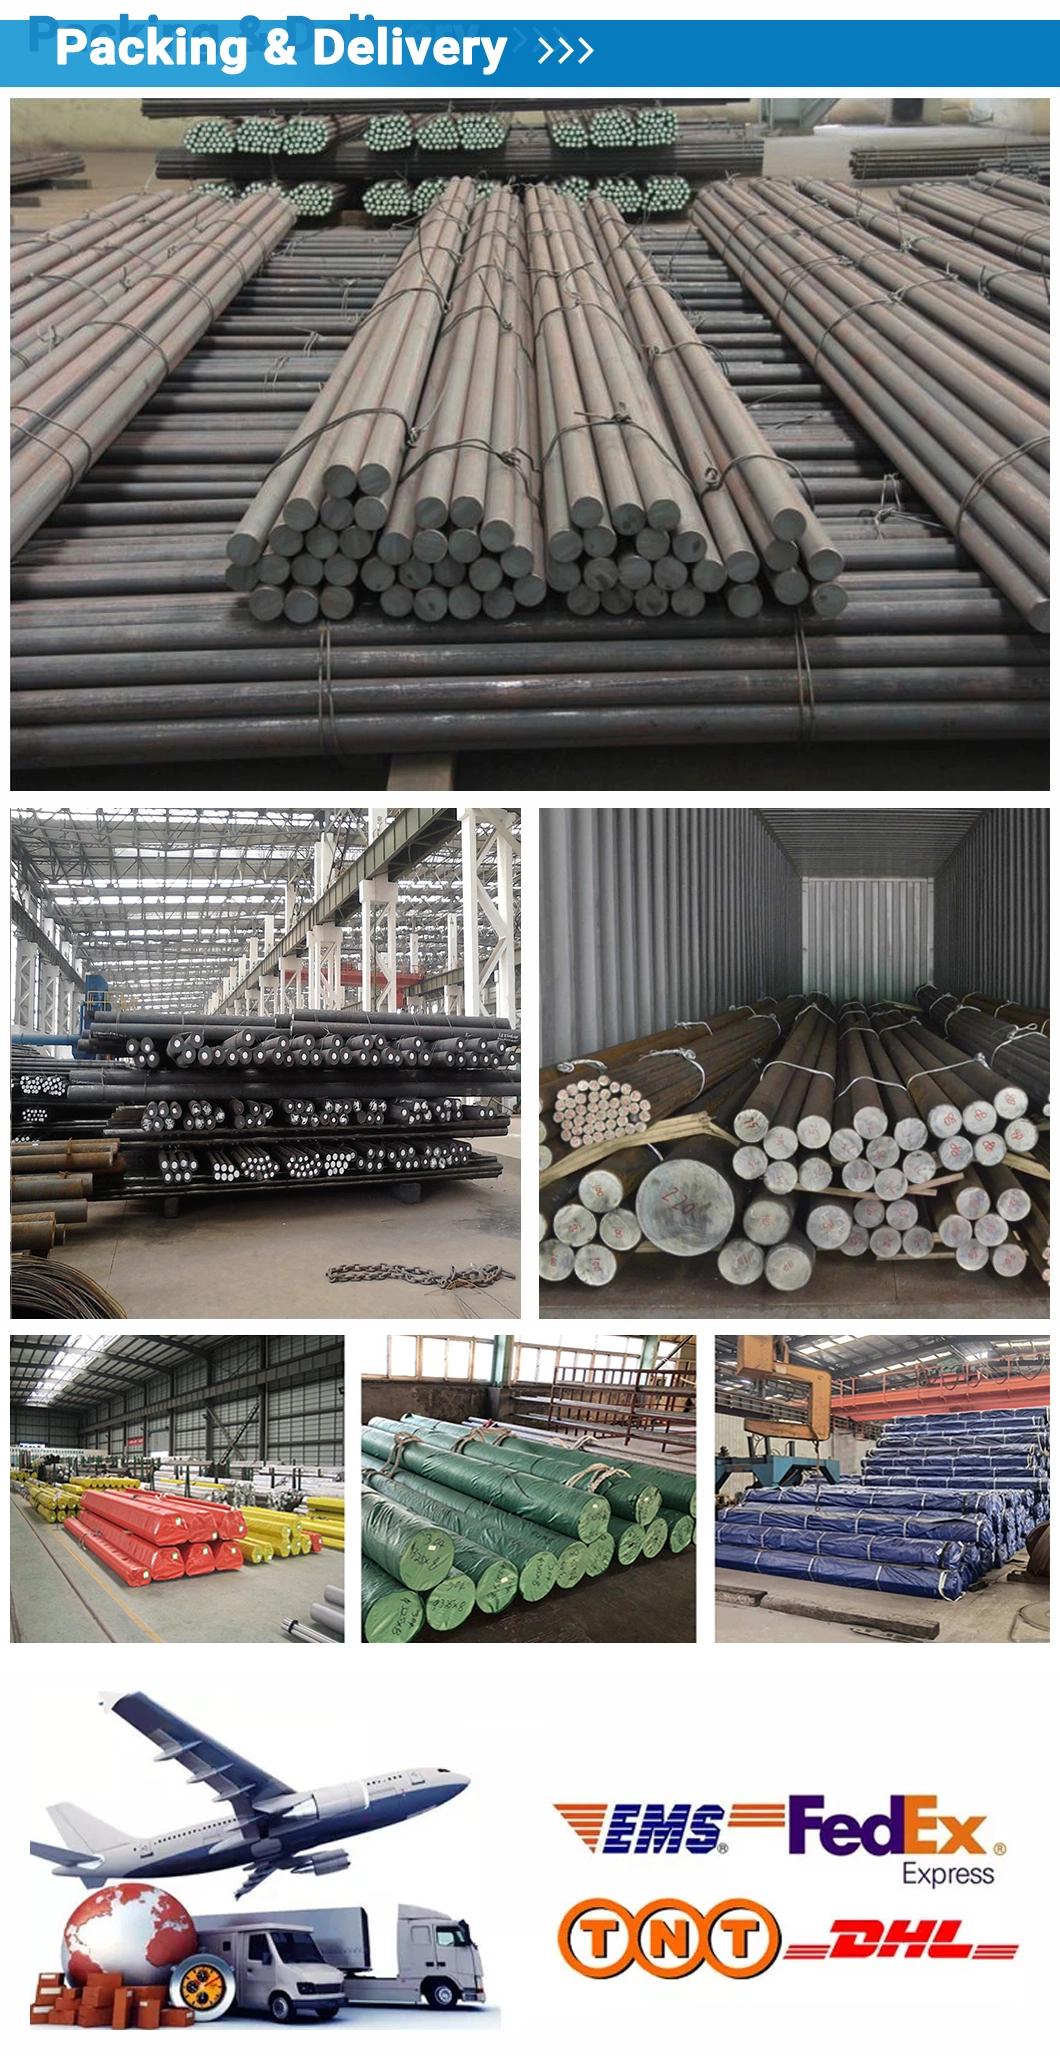 Manufacturer Ss41 Black Iron Steel Solid Rods ASTM A29, A108, A321, A575 Q235B A336 20mm 25mm28mm Low Carbon Steel Round Bar